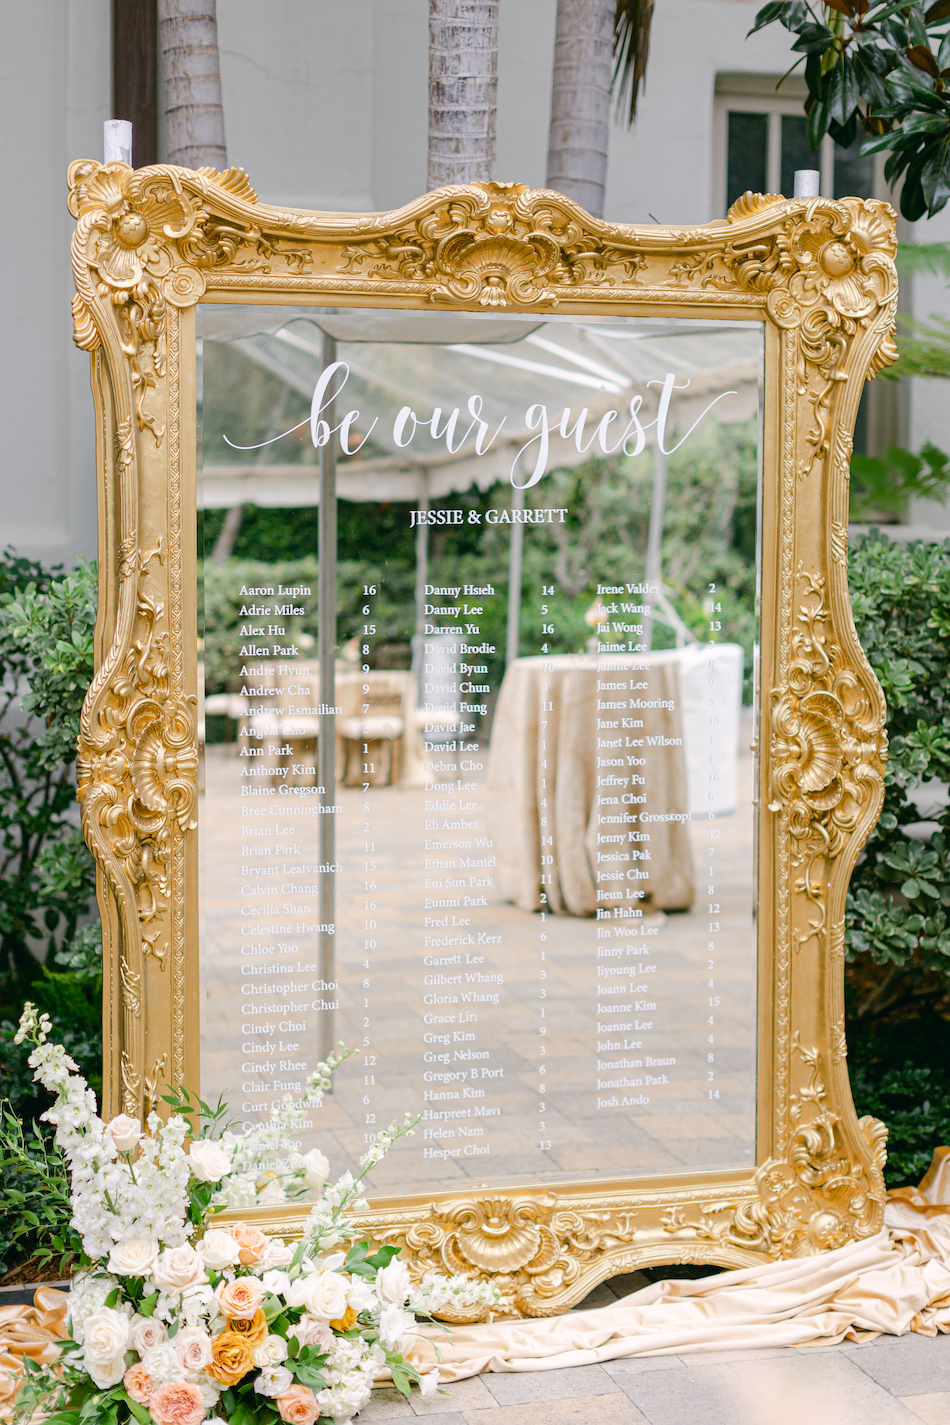 seating chart, gold, mirror, floral design, florist, wedding florist, wedding flowers, orange county weddings, orange county wedding florist, orange county florist, orange county floral design, flowers by cina